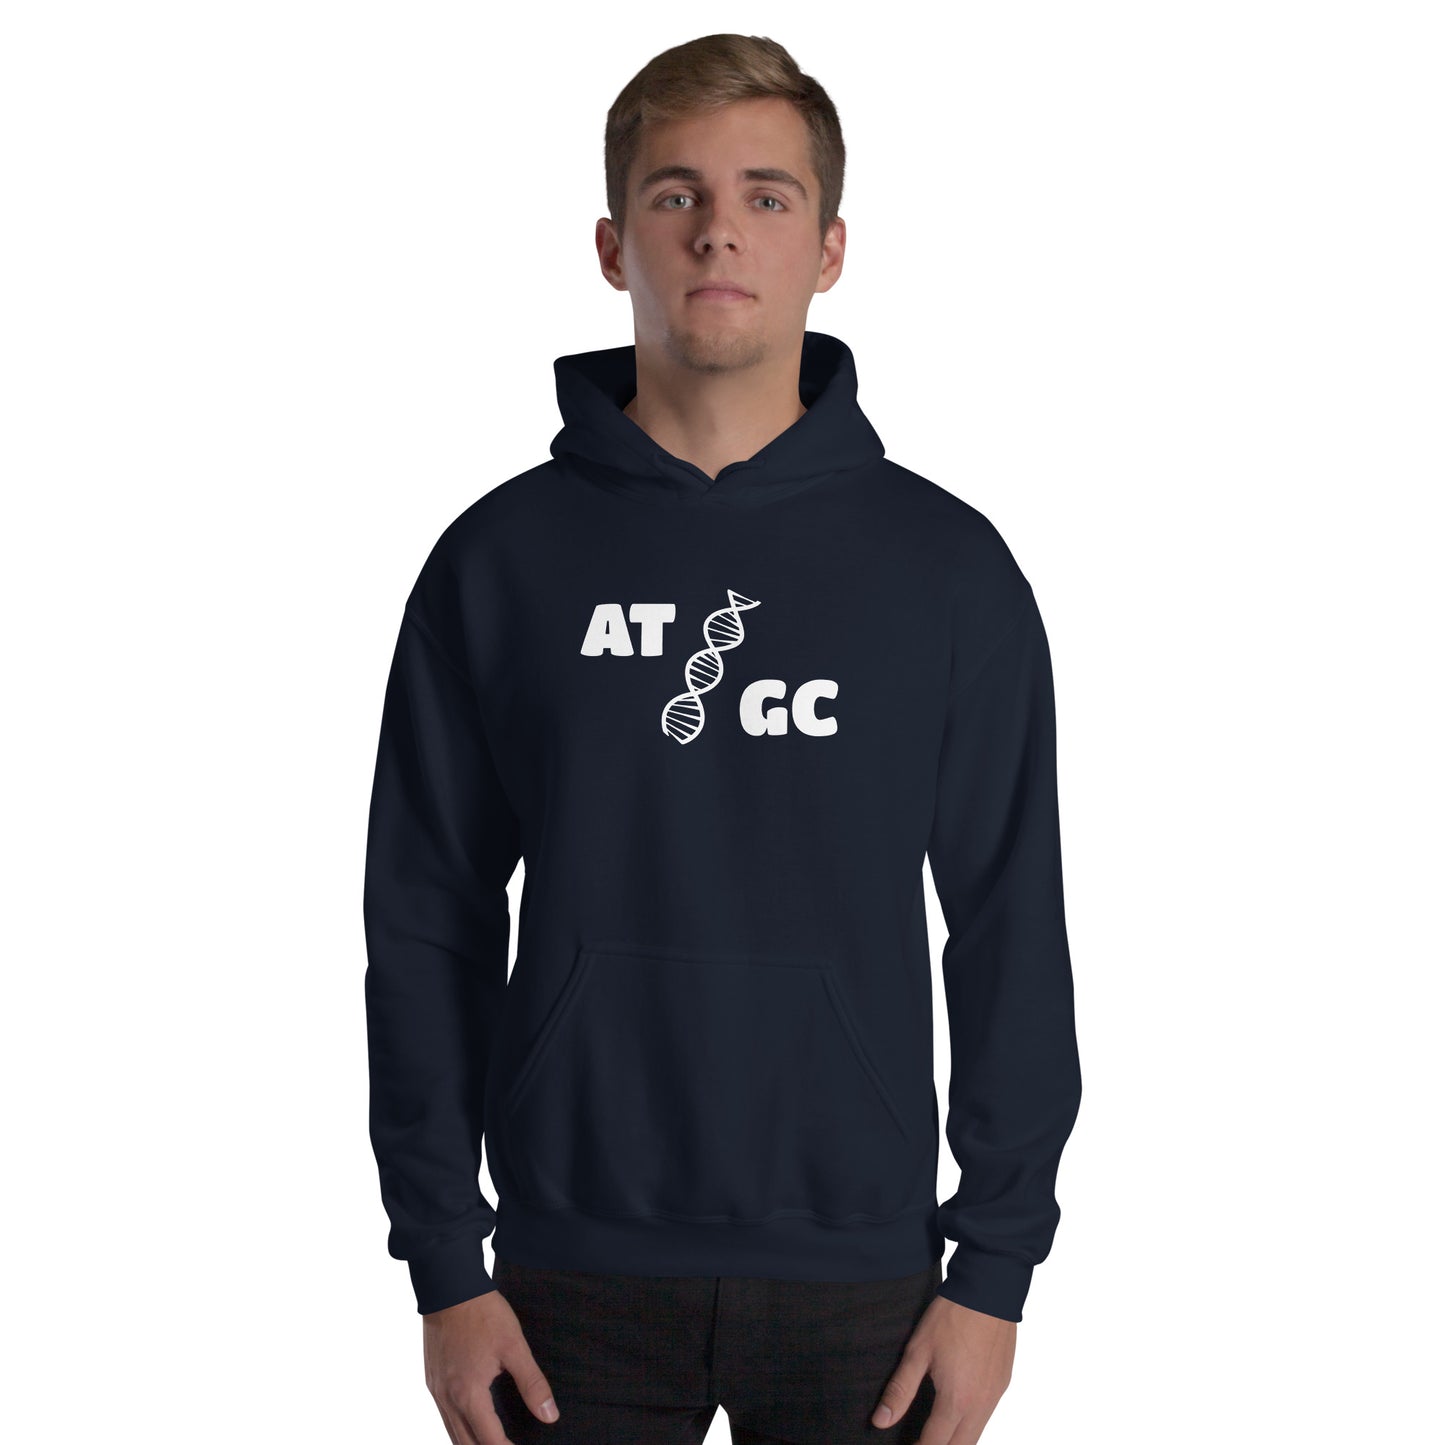 Men with navy blue hoodie with image of a DNA string and the text "ATGC"